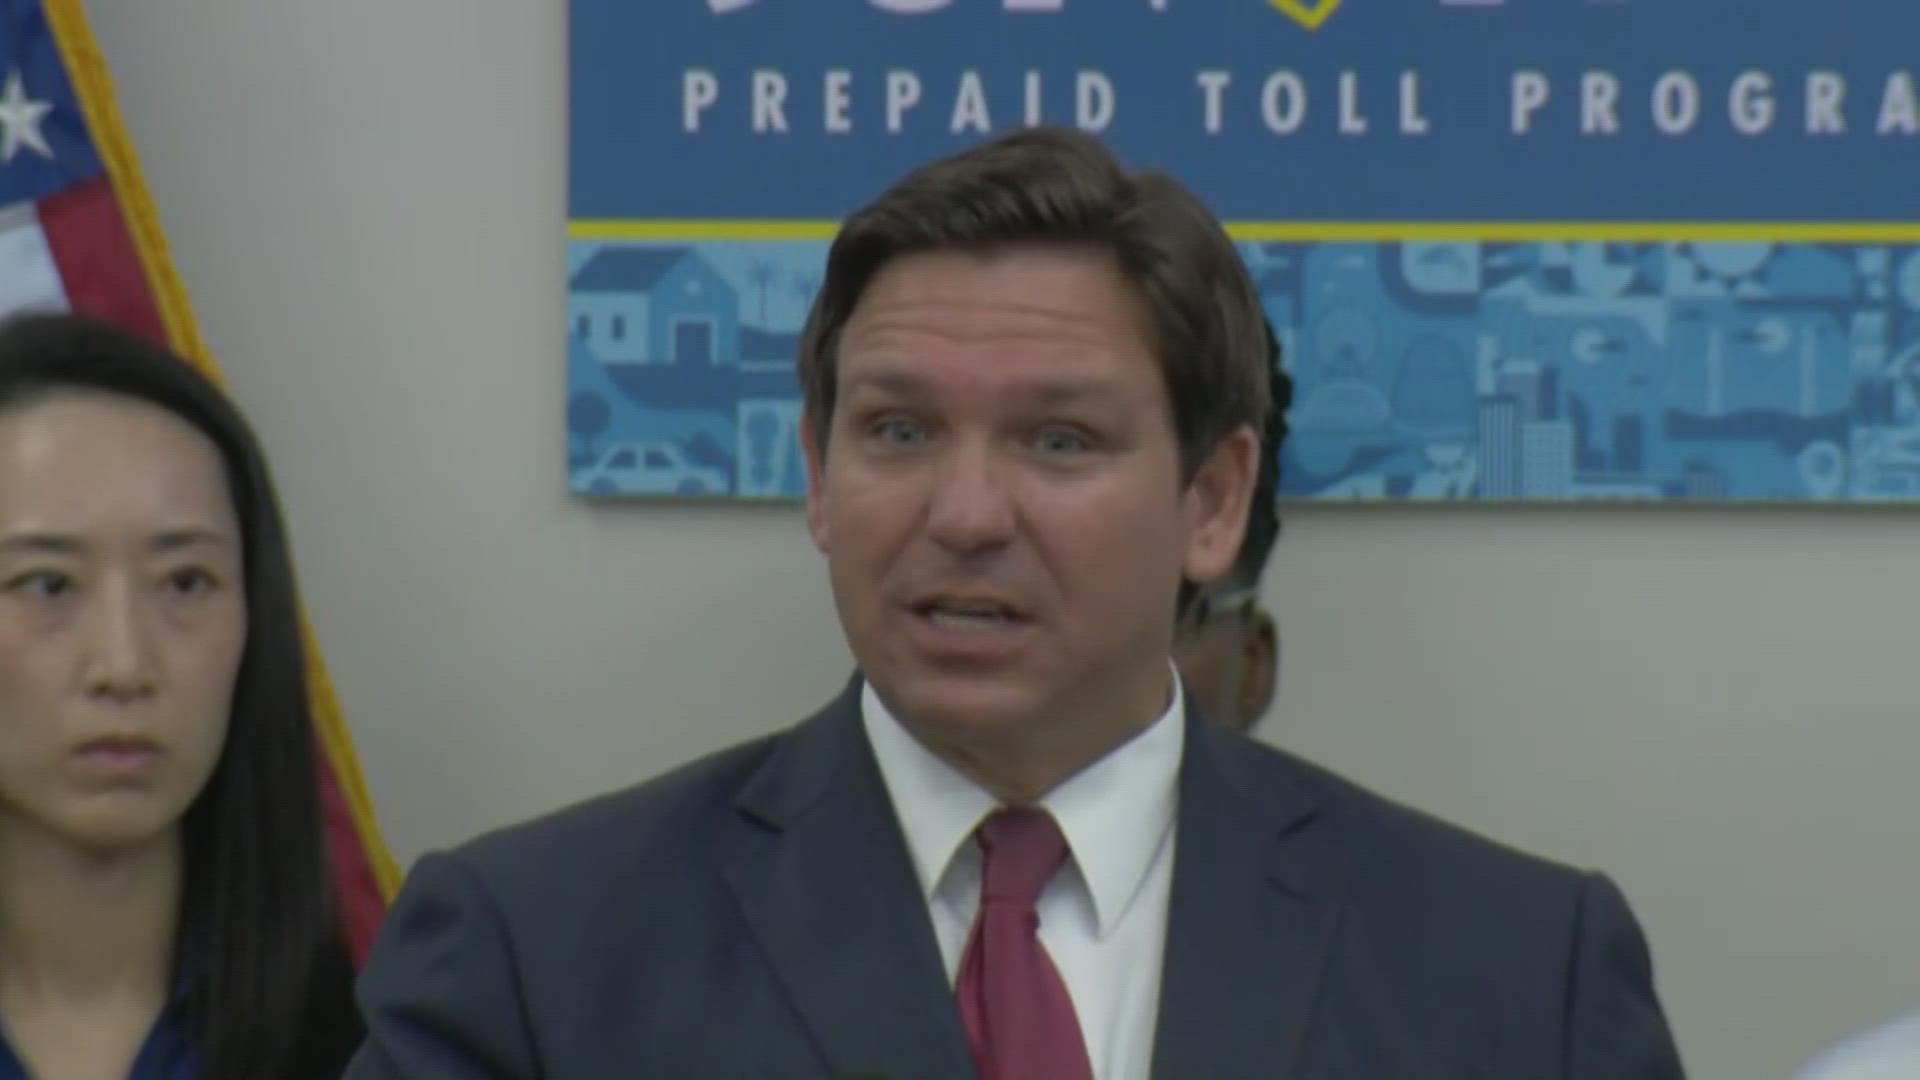 Gov. Ron DeSantis announced Thursday the SunPass Savings Program, which will credit drivers up to 25% of their tolls back to them every month for the next six months